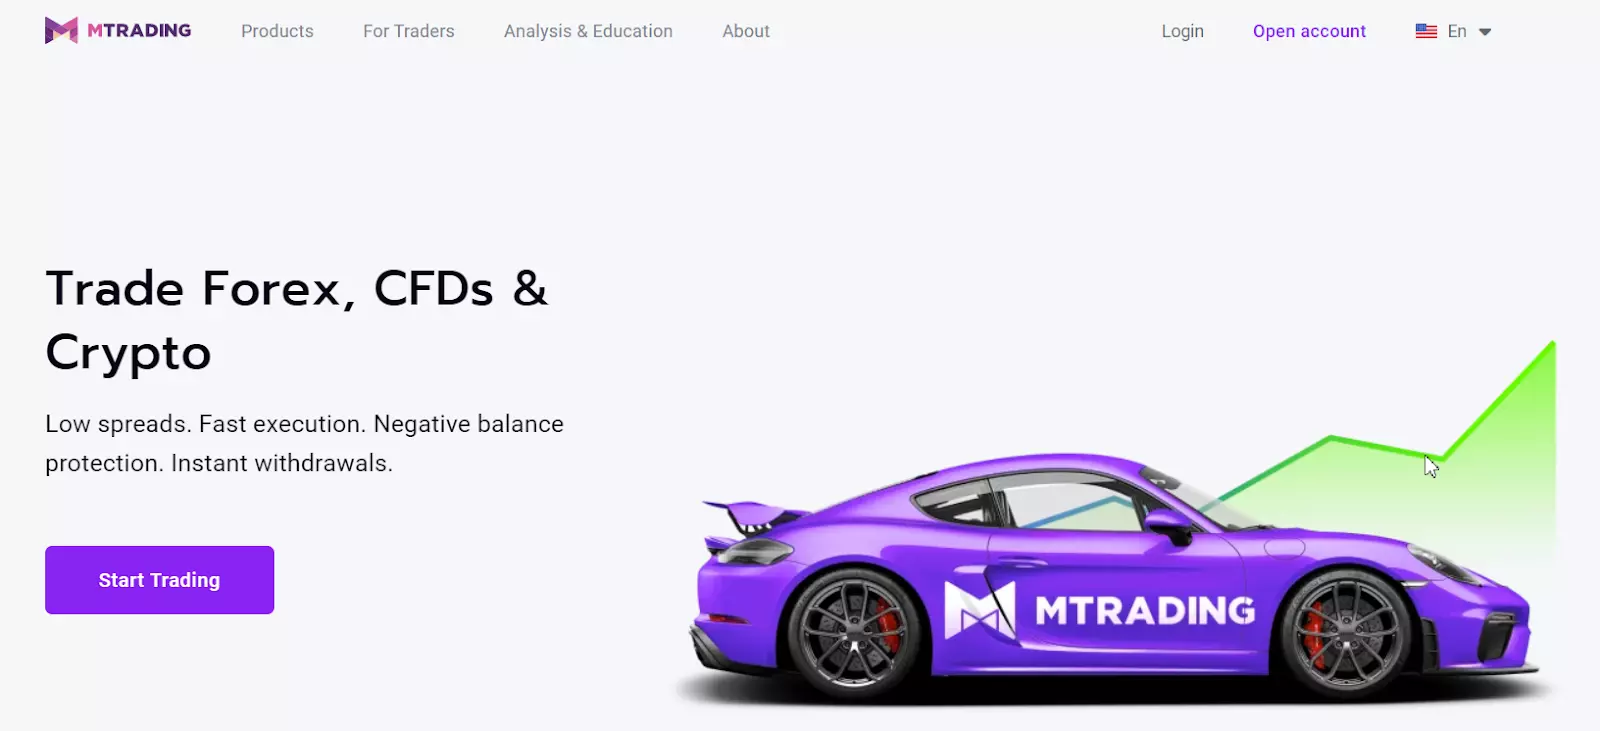 MTrading review - Website